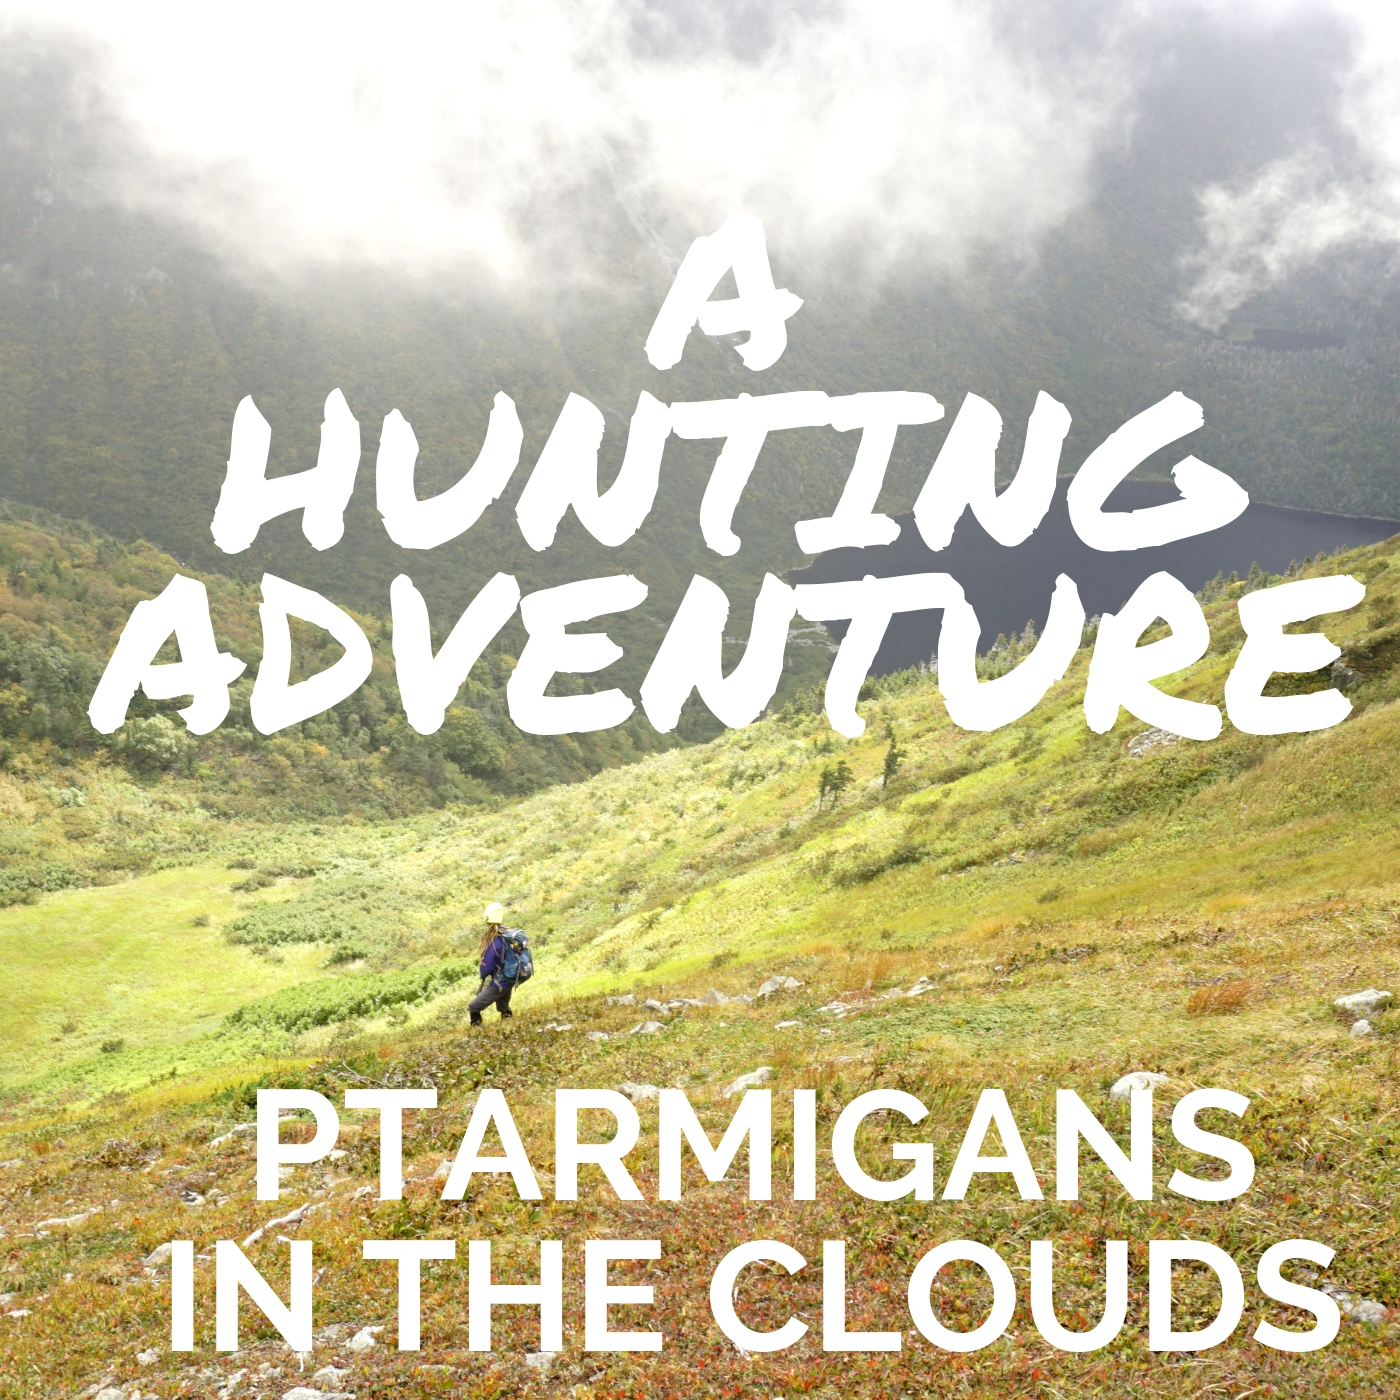 A hunting Adventure; ptarmigans in the clouds, starlite trail, hunting newfoundland, small game hunting, ptarmigan hunting, Wildly Intrepid